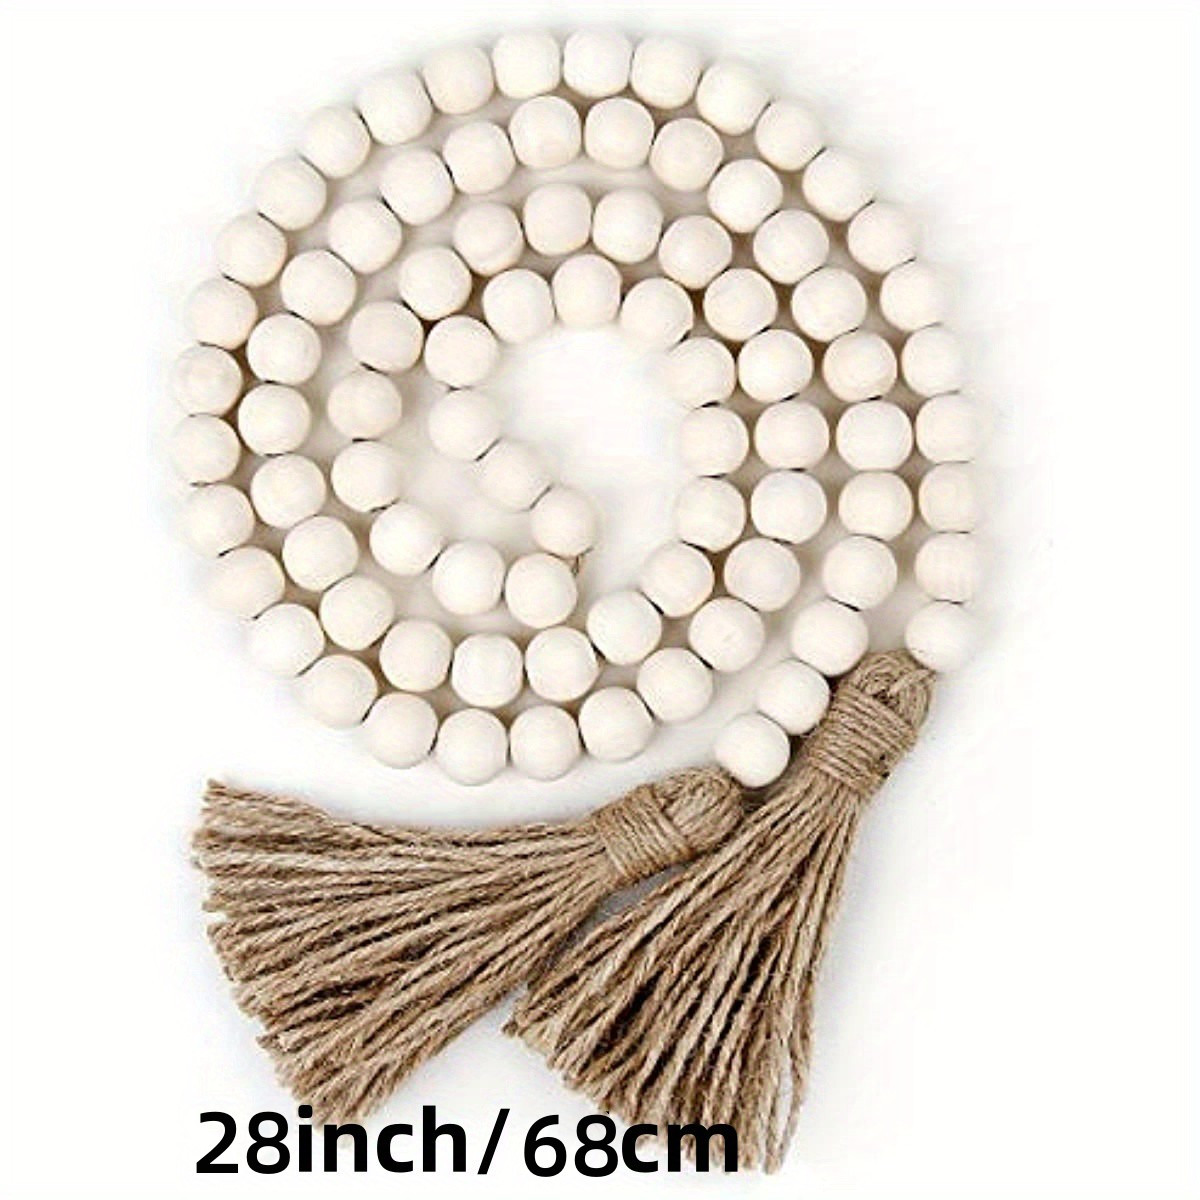  TEHAUX Heart Beads Clay Beads Refill 40pcs Farmhouse Beads  Wooden Beads Valentine Garland Beads Crafts Jewelry Wood Clay Tassel  Valentine Wood Beads Farmhouse Craft Jewelry Beads : Arts, Crafts & Sewing